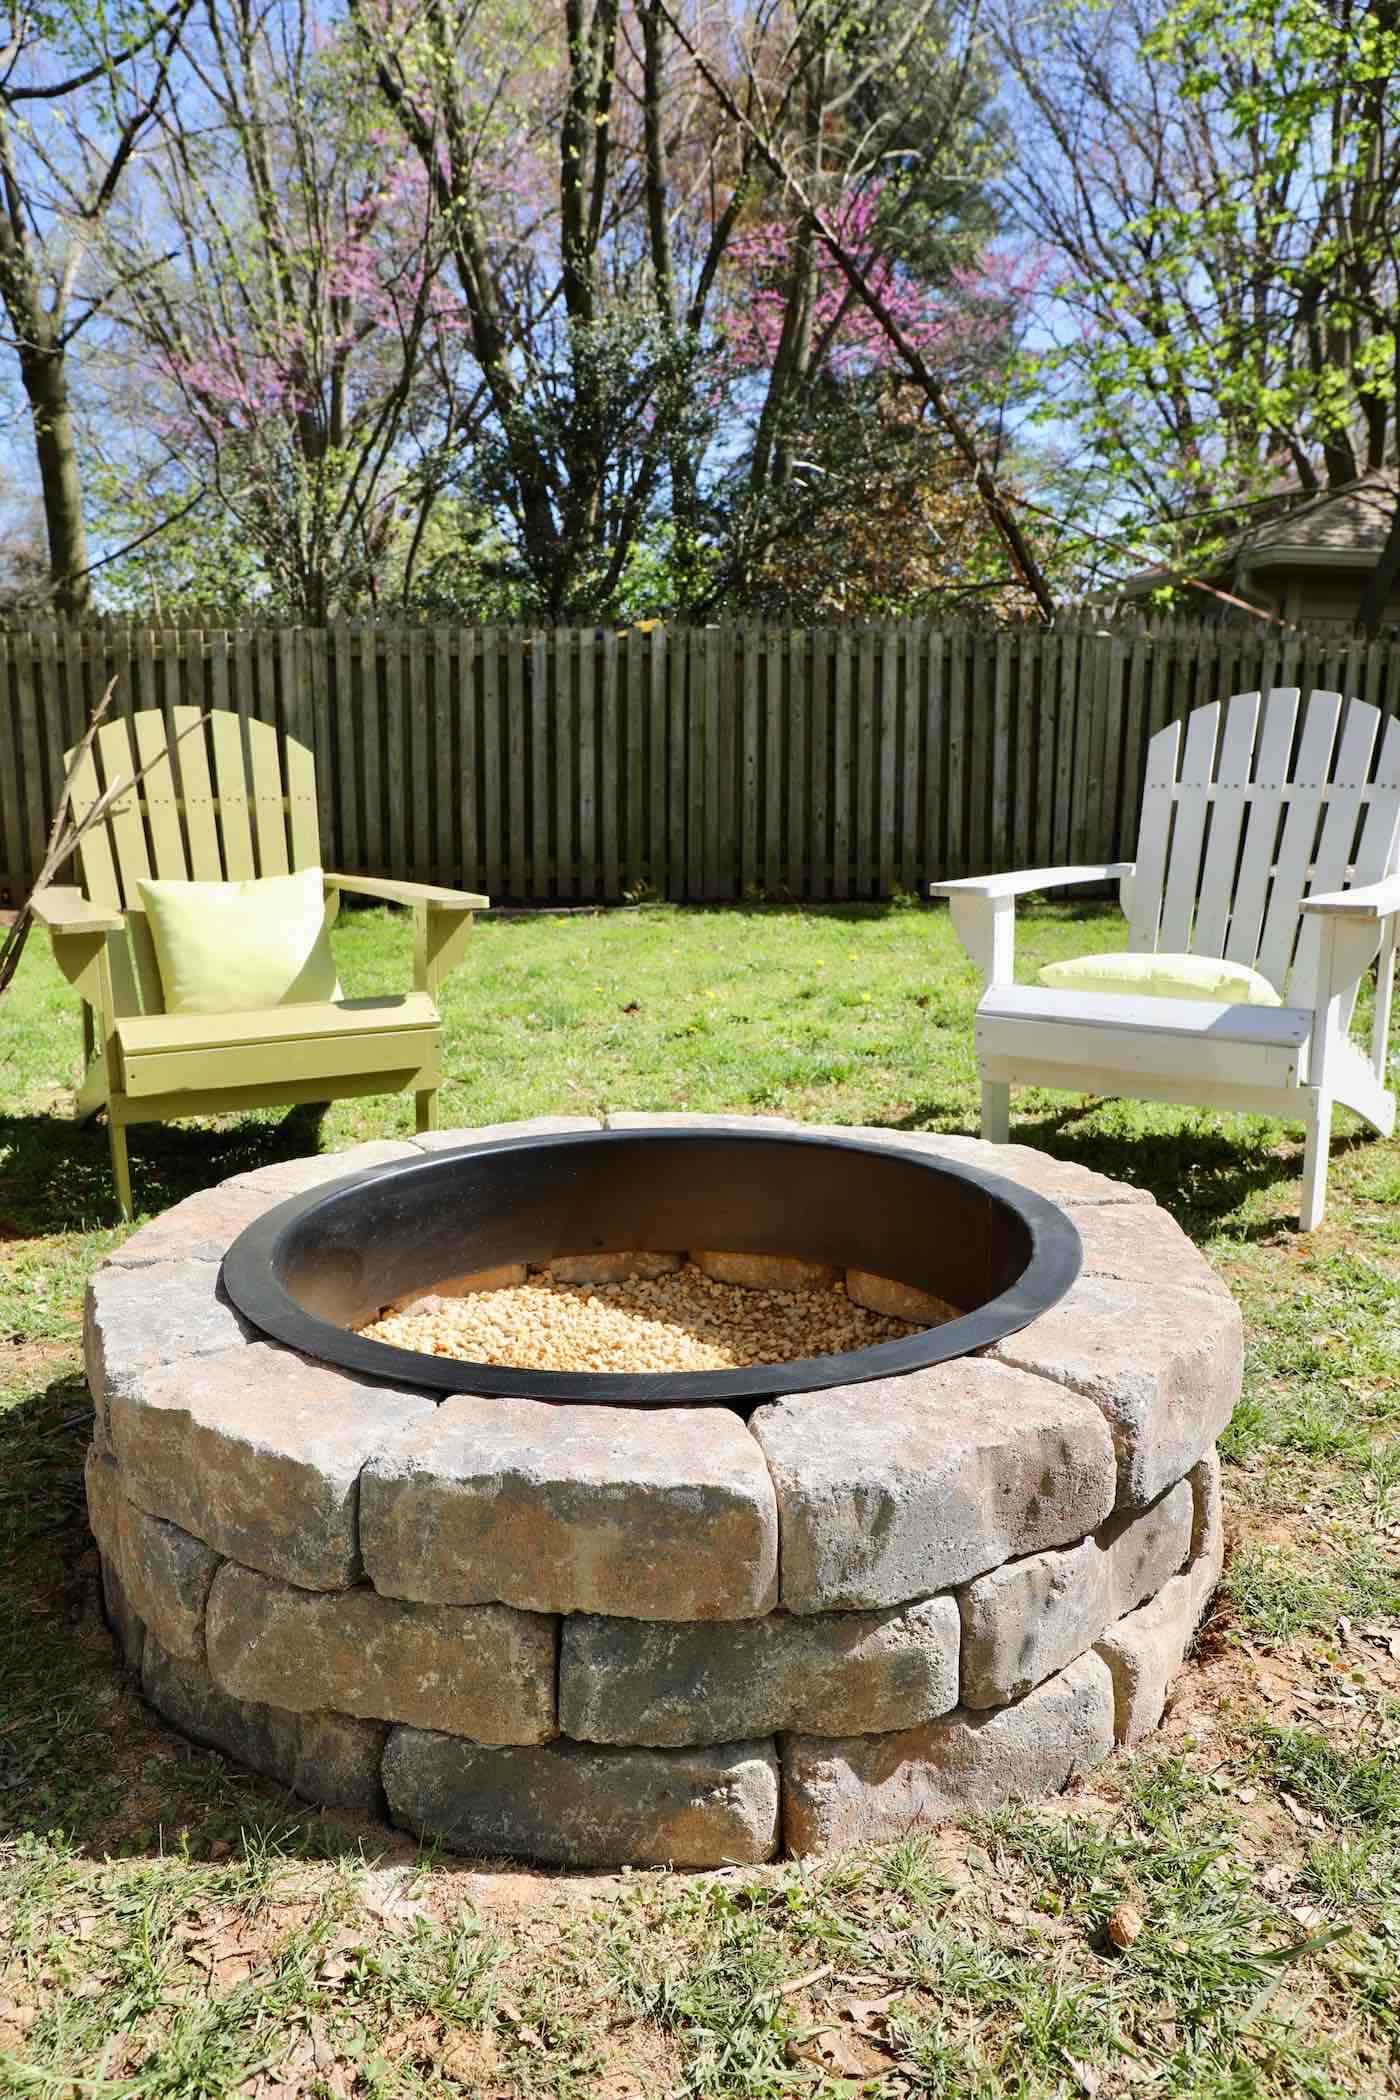 Diy Fire Pit With Gravel Stones, How To Make Your Own Fire Pit